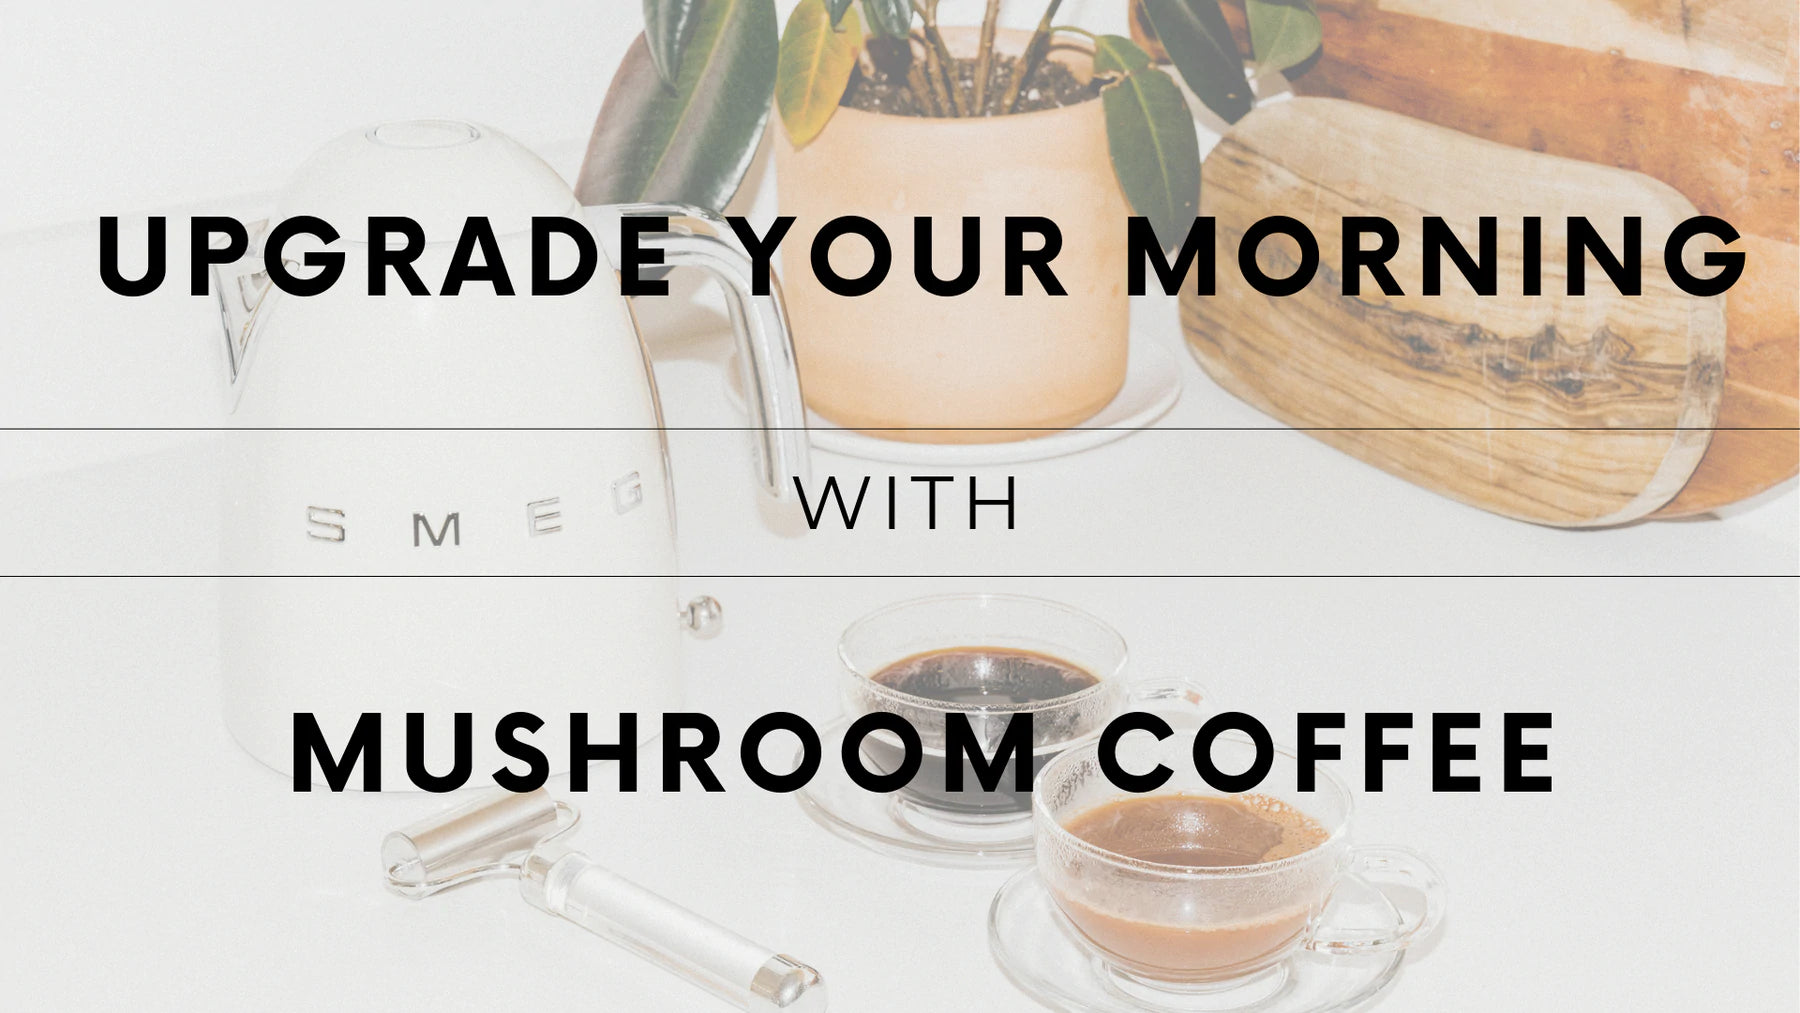 Upgrade Your Morning with Mushroom Coffee